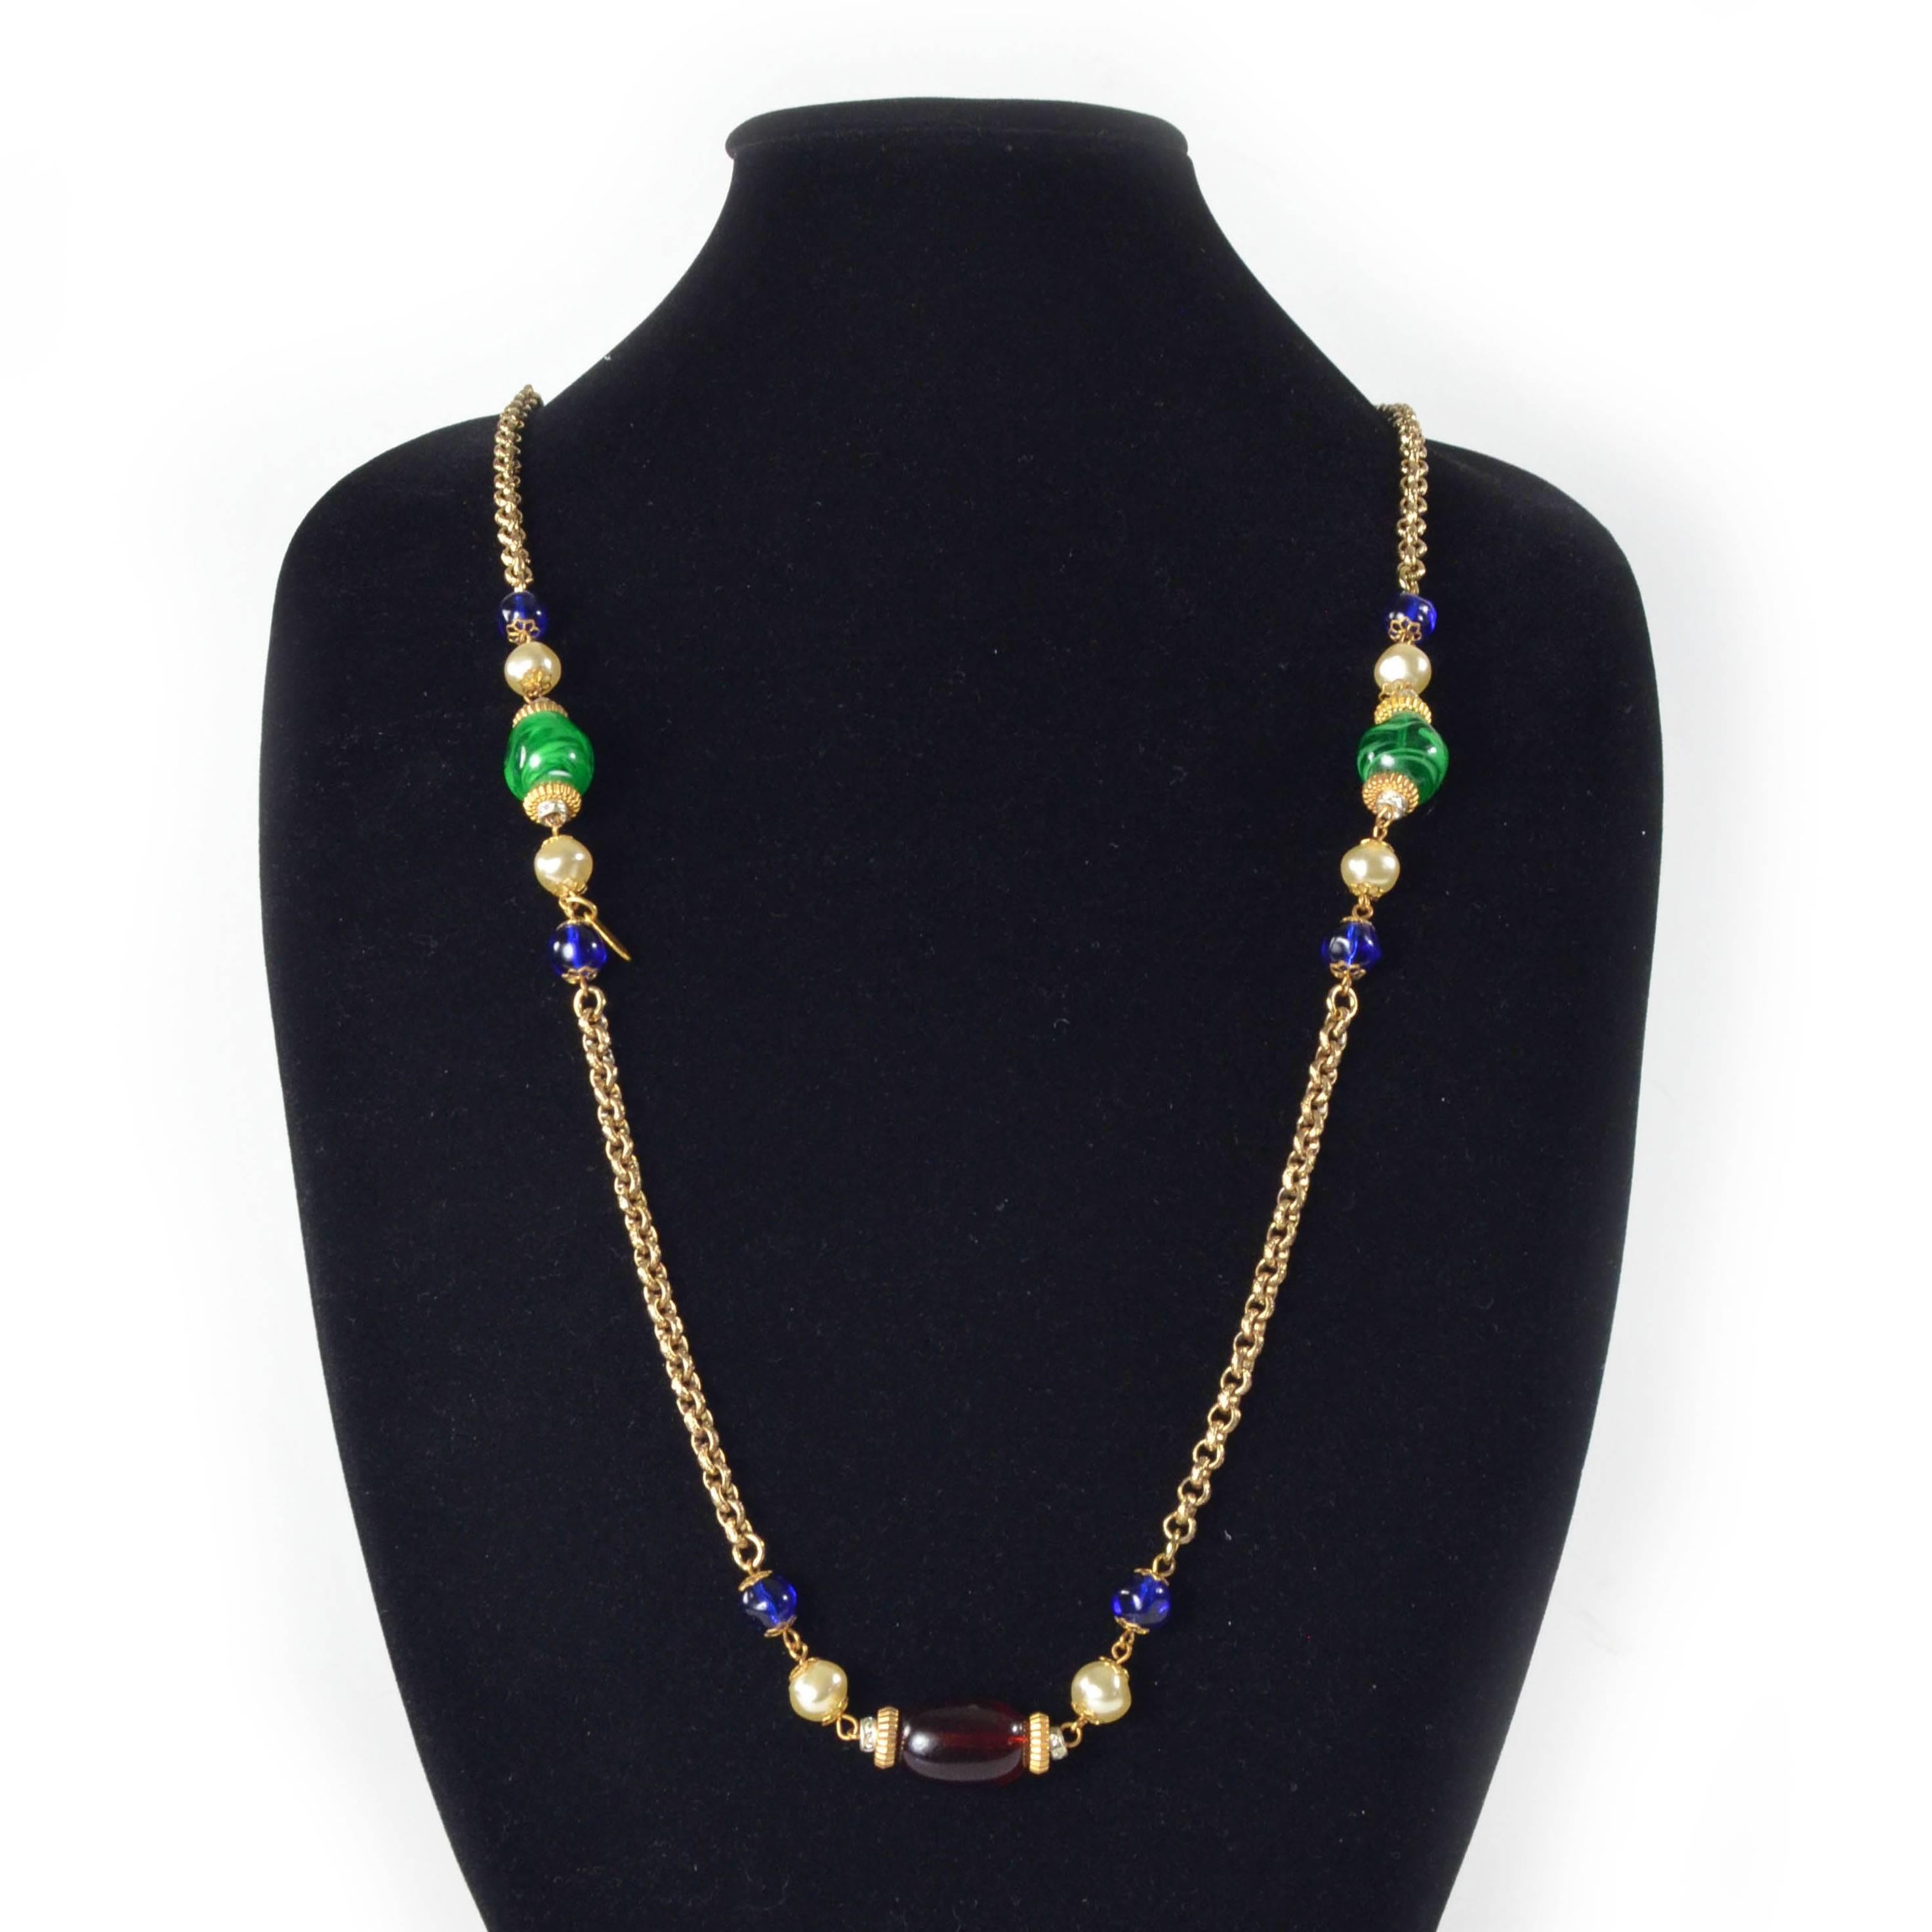 Chanel - Pearl Gripoix Glass Necklace

Color: Gold / Multi

Material: Pearl Beads / Glass / Crystal

------------------------------------------------------------

Details:

- single or double wrap around neck

- gold tone hardware

- green, red,